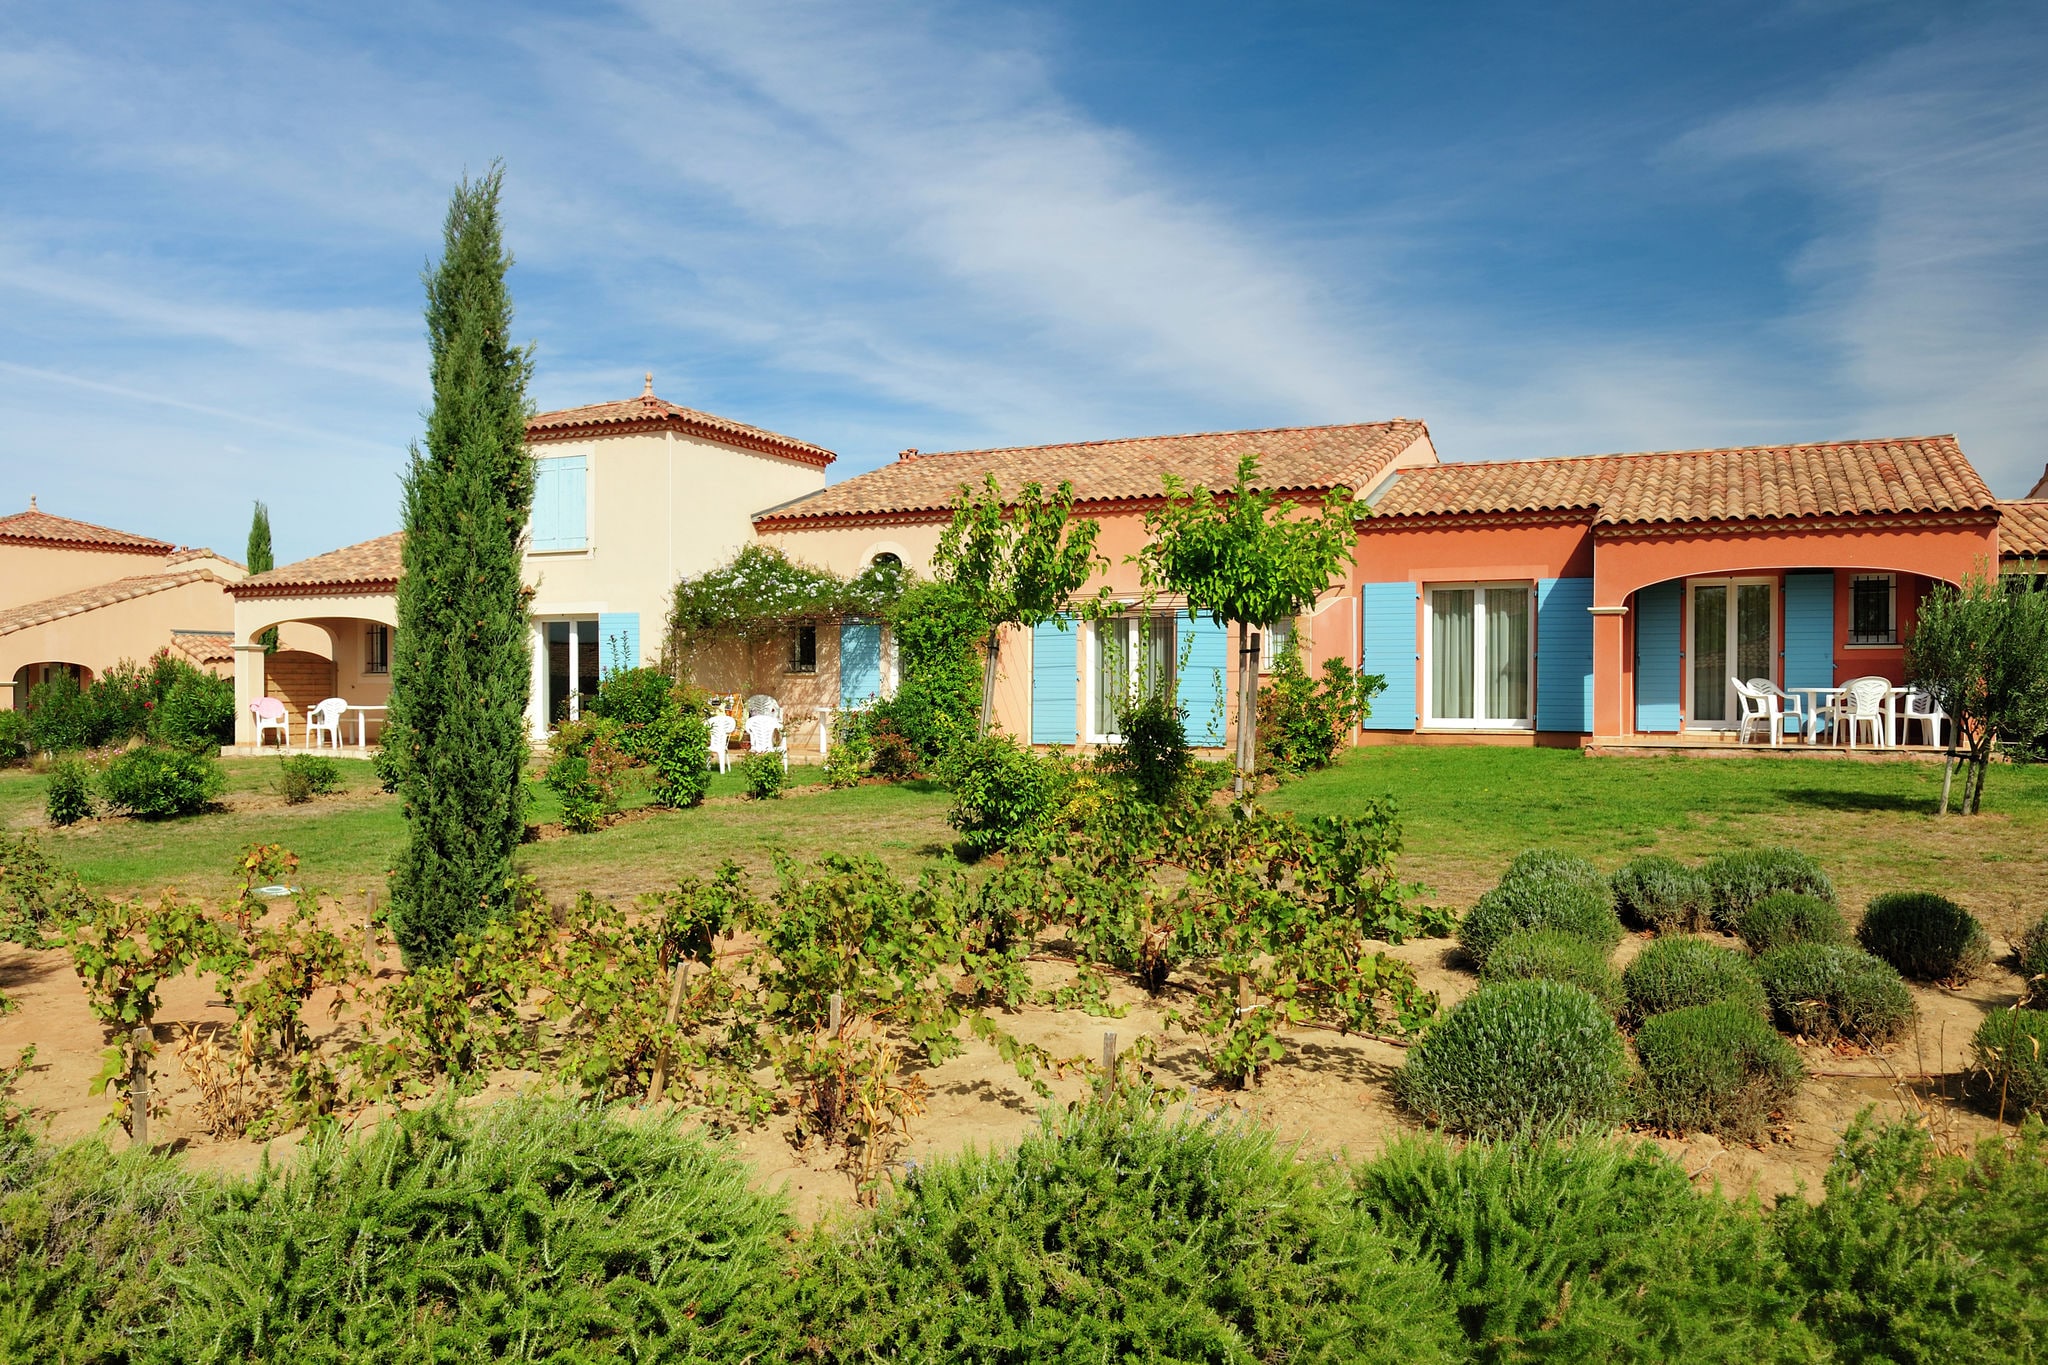 Detached house with terrace or loggia, located in Languedoc